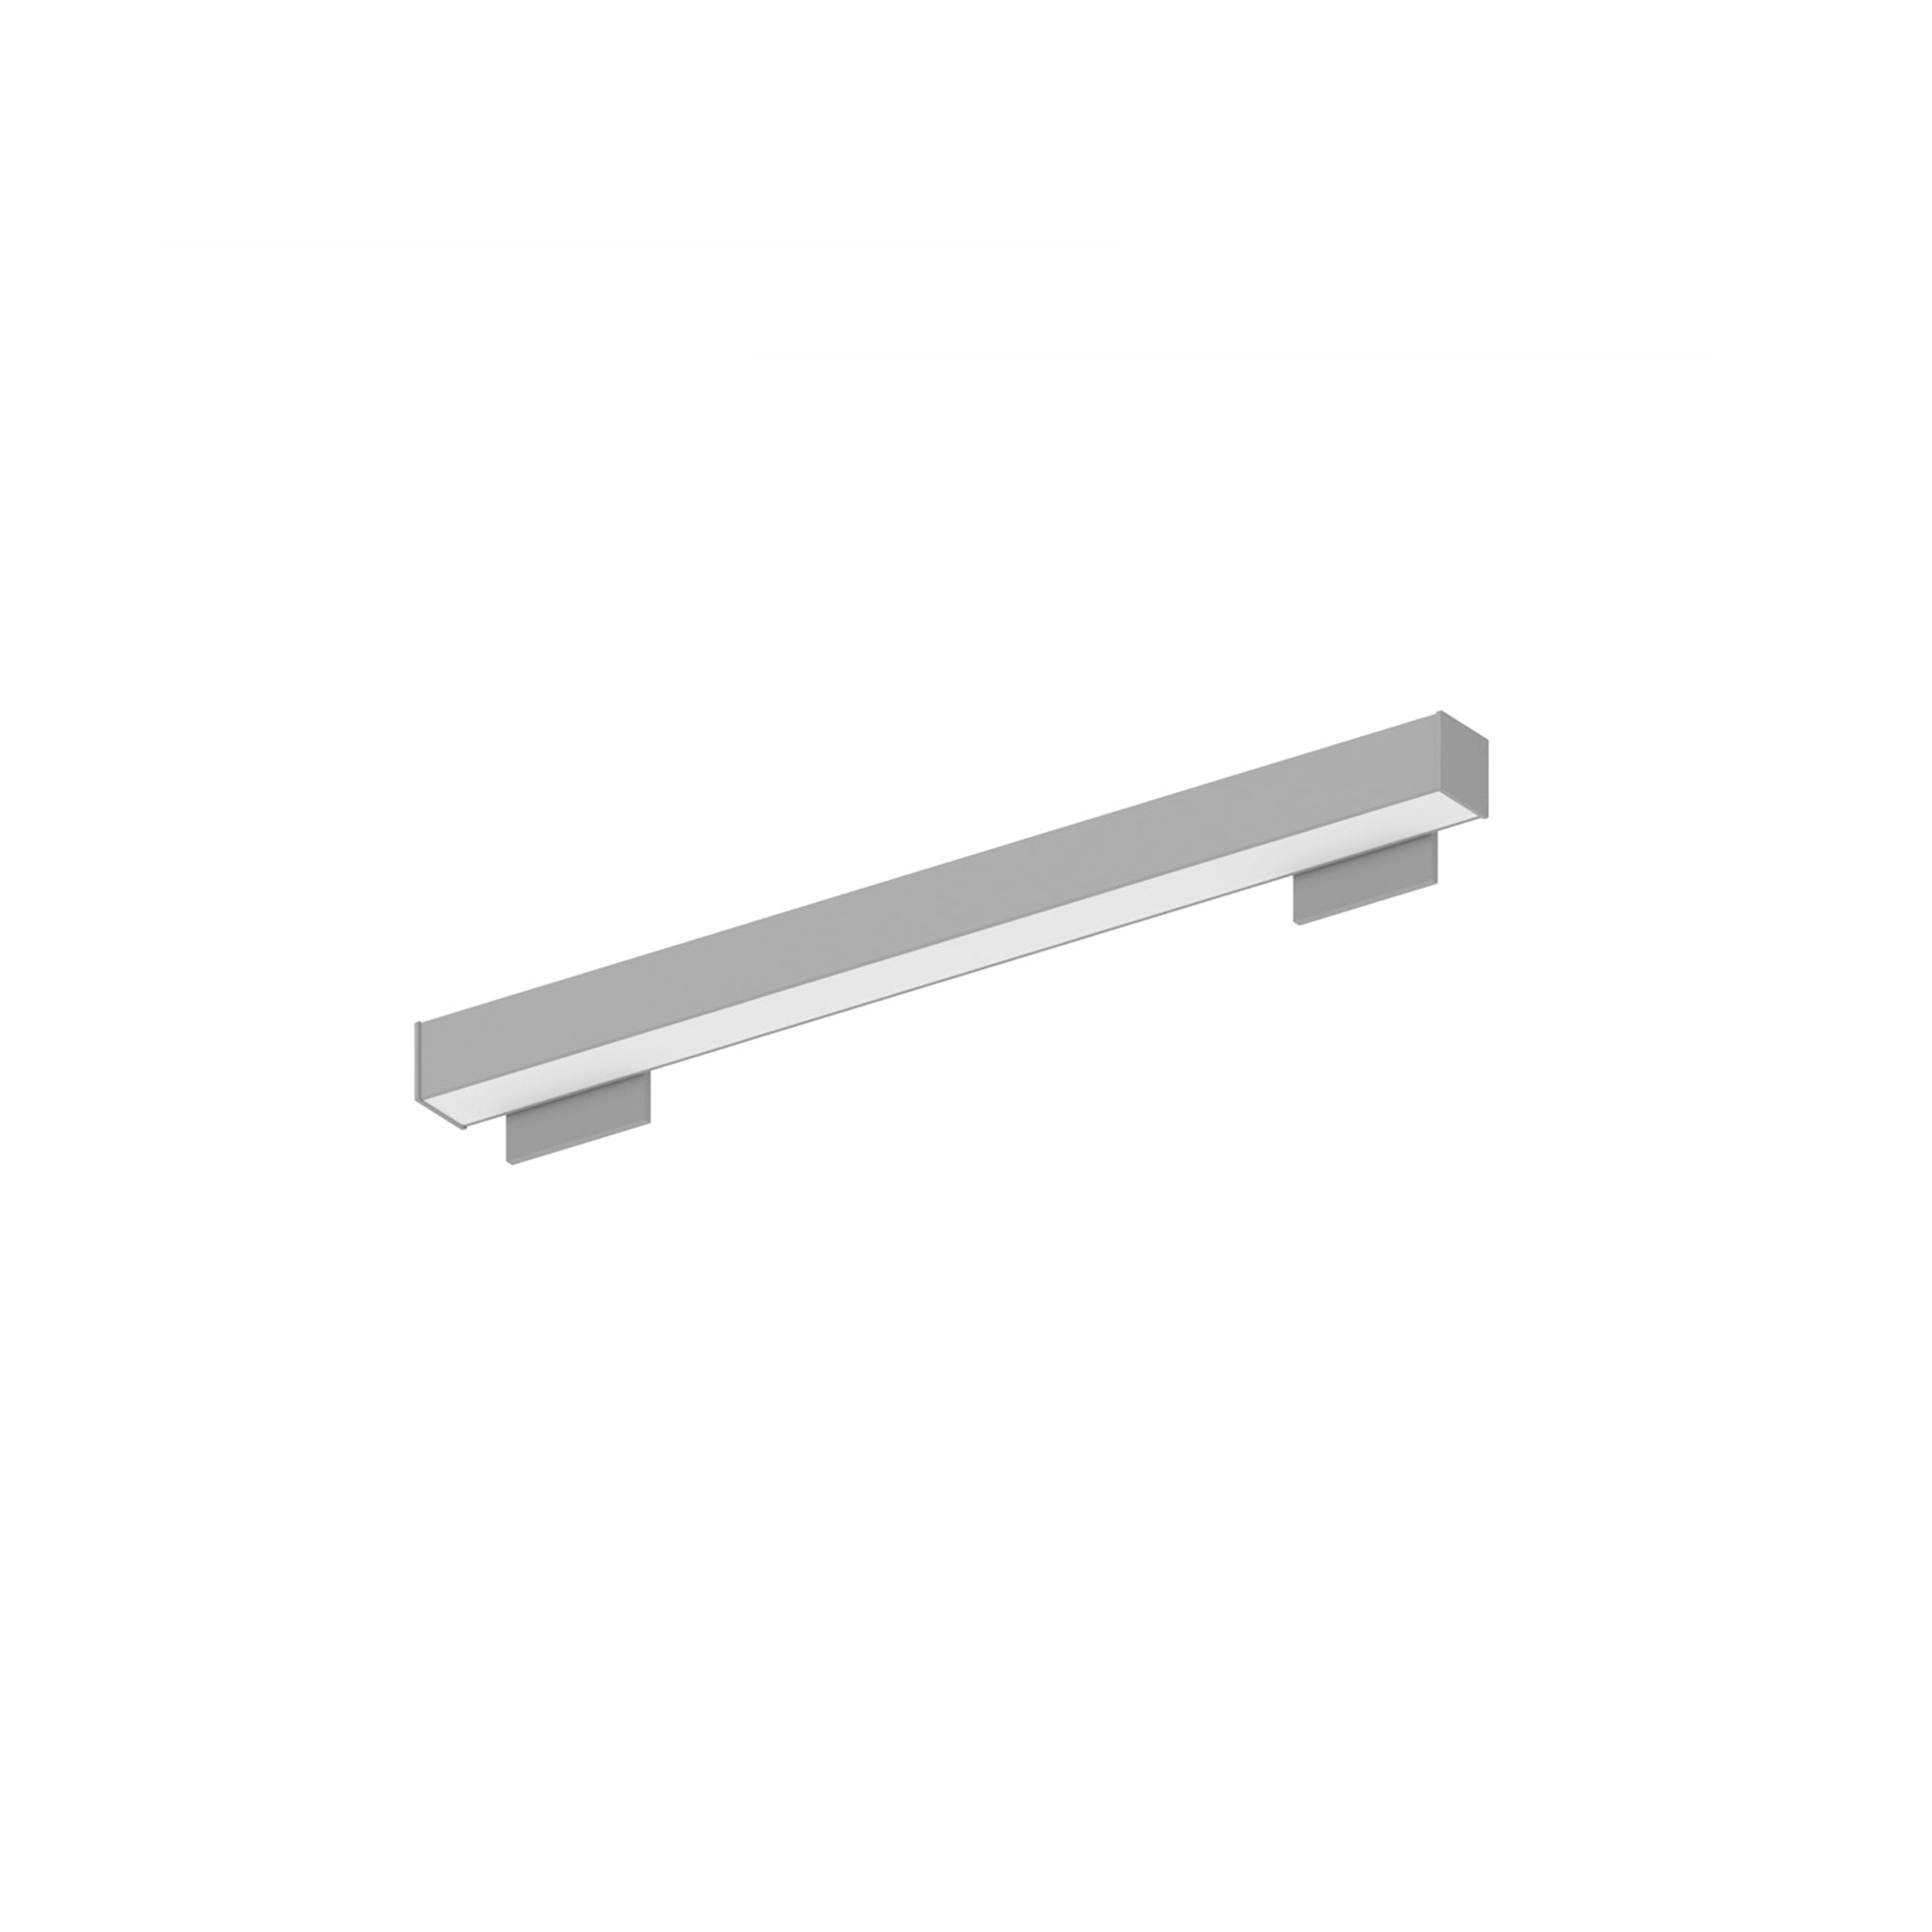 Nora Lighting NWLIN-21030A/L4-R4P - Linear - 2' L-Line LED Wall Mount Linear, 2100lm / 3000K, 4 Inchx4 Inch Left Plate & 4 Inchx4 Inch Right Plate, Right Power Feed, Aluminum Finish